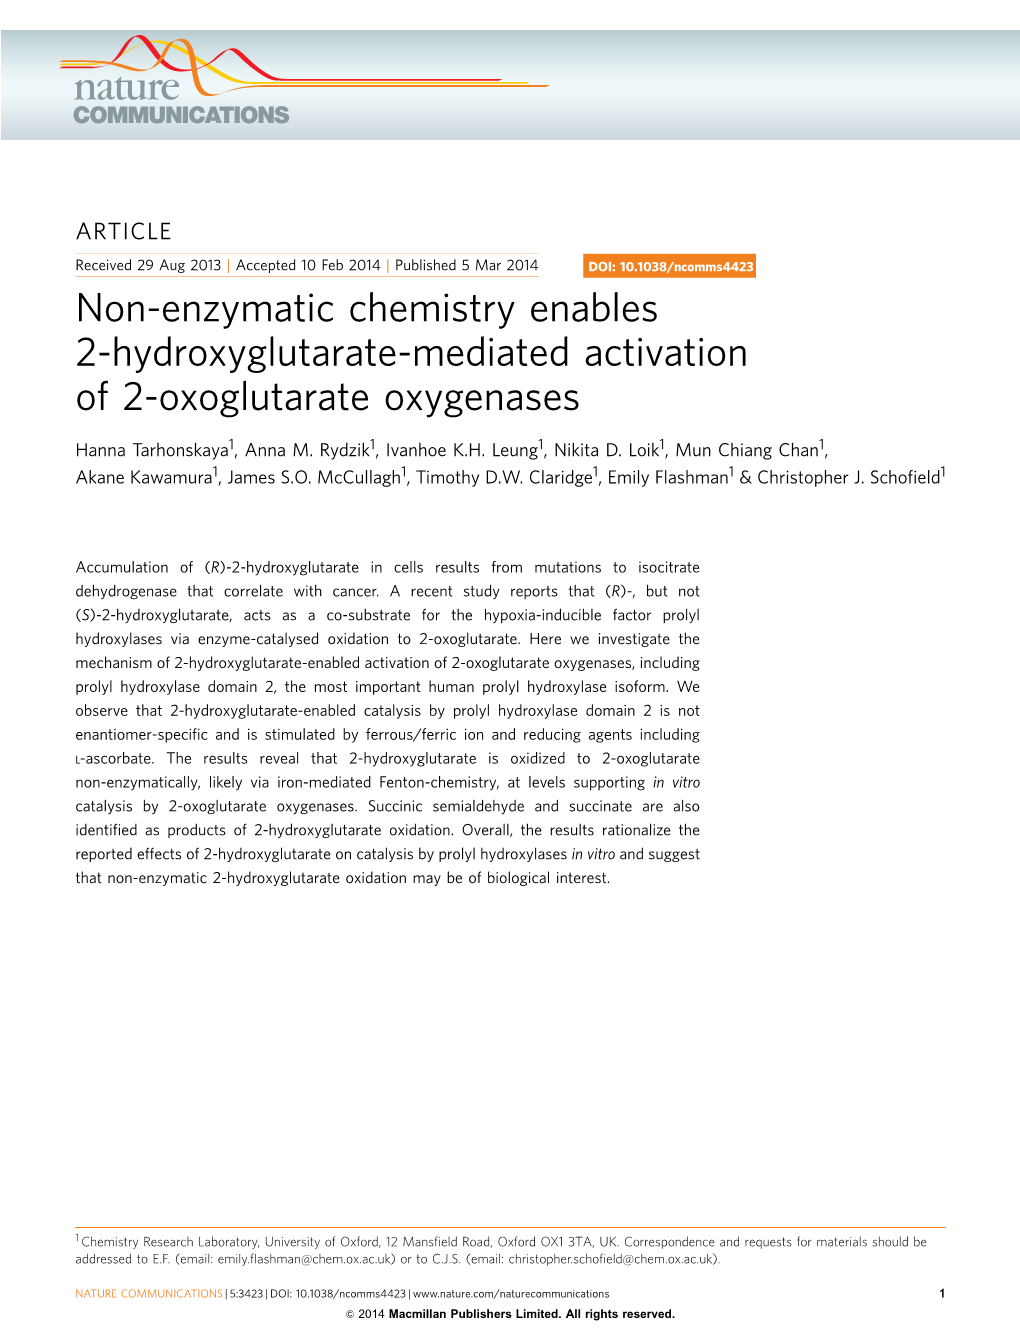 Non-Enzymatic Chemistry Enables 2-Hydroxyglutarate-Mediated Activation of 2-Oxoglutarate Oxygenases